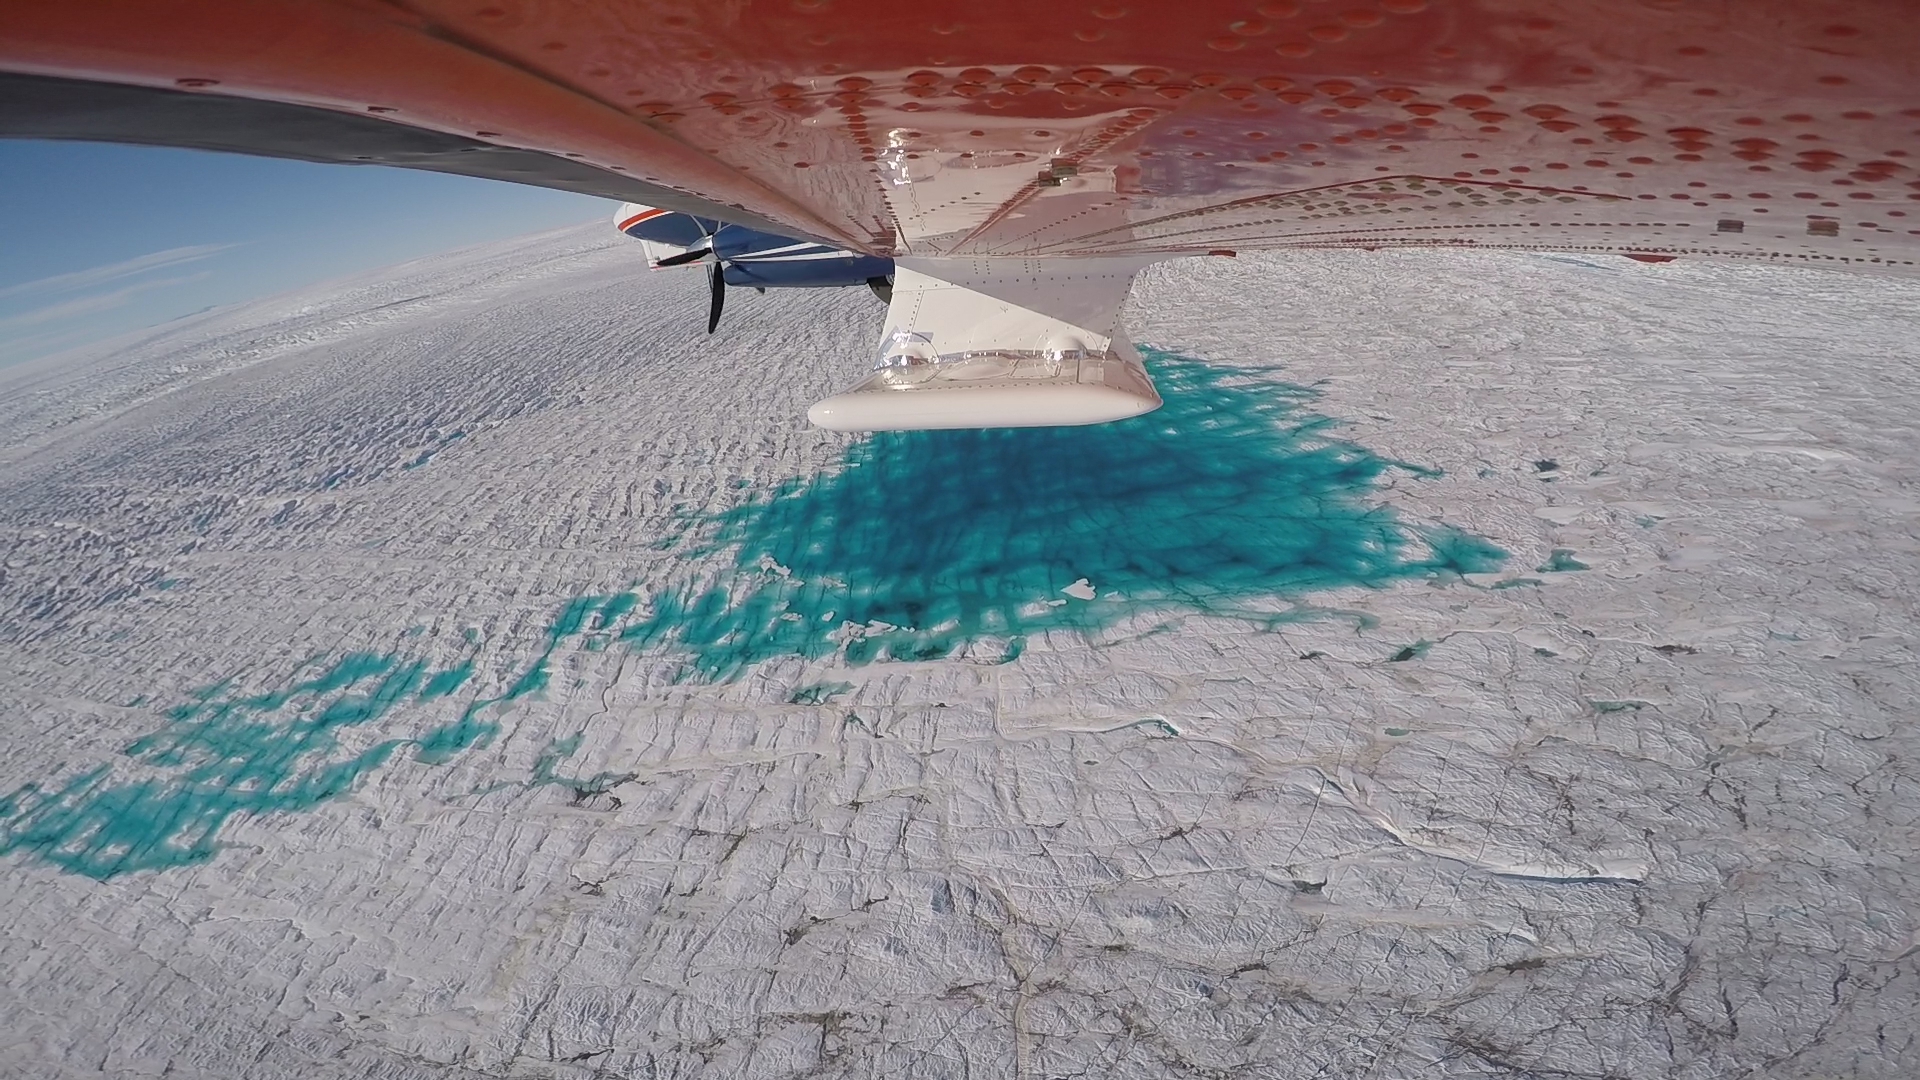 The AWI research aircraft Polar 6 flying over the 79-Degree-North Glacier in Greenland. The photo clearly shows small melt-water lakes on the glacier’s surface. Photo: Alfred-Wegener-Institut